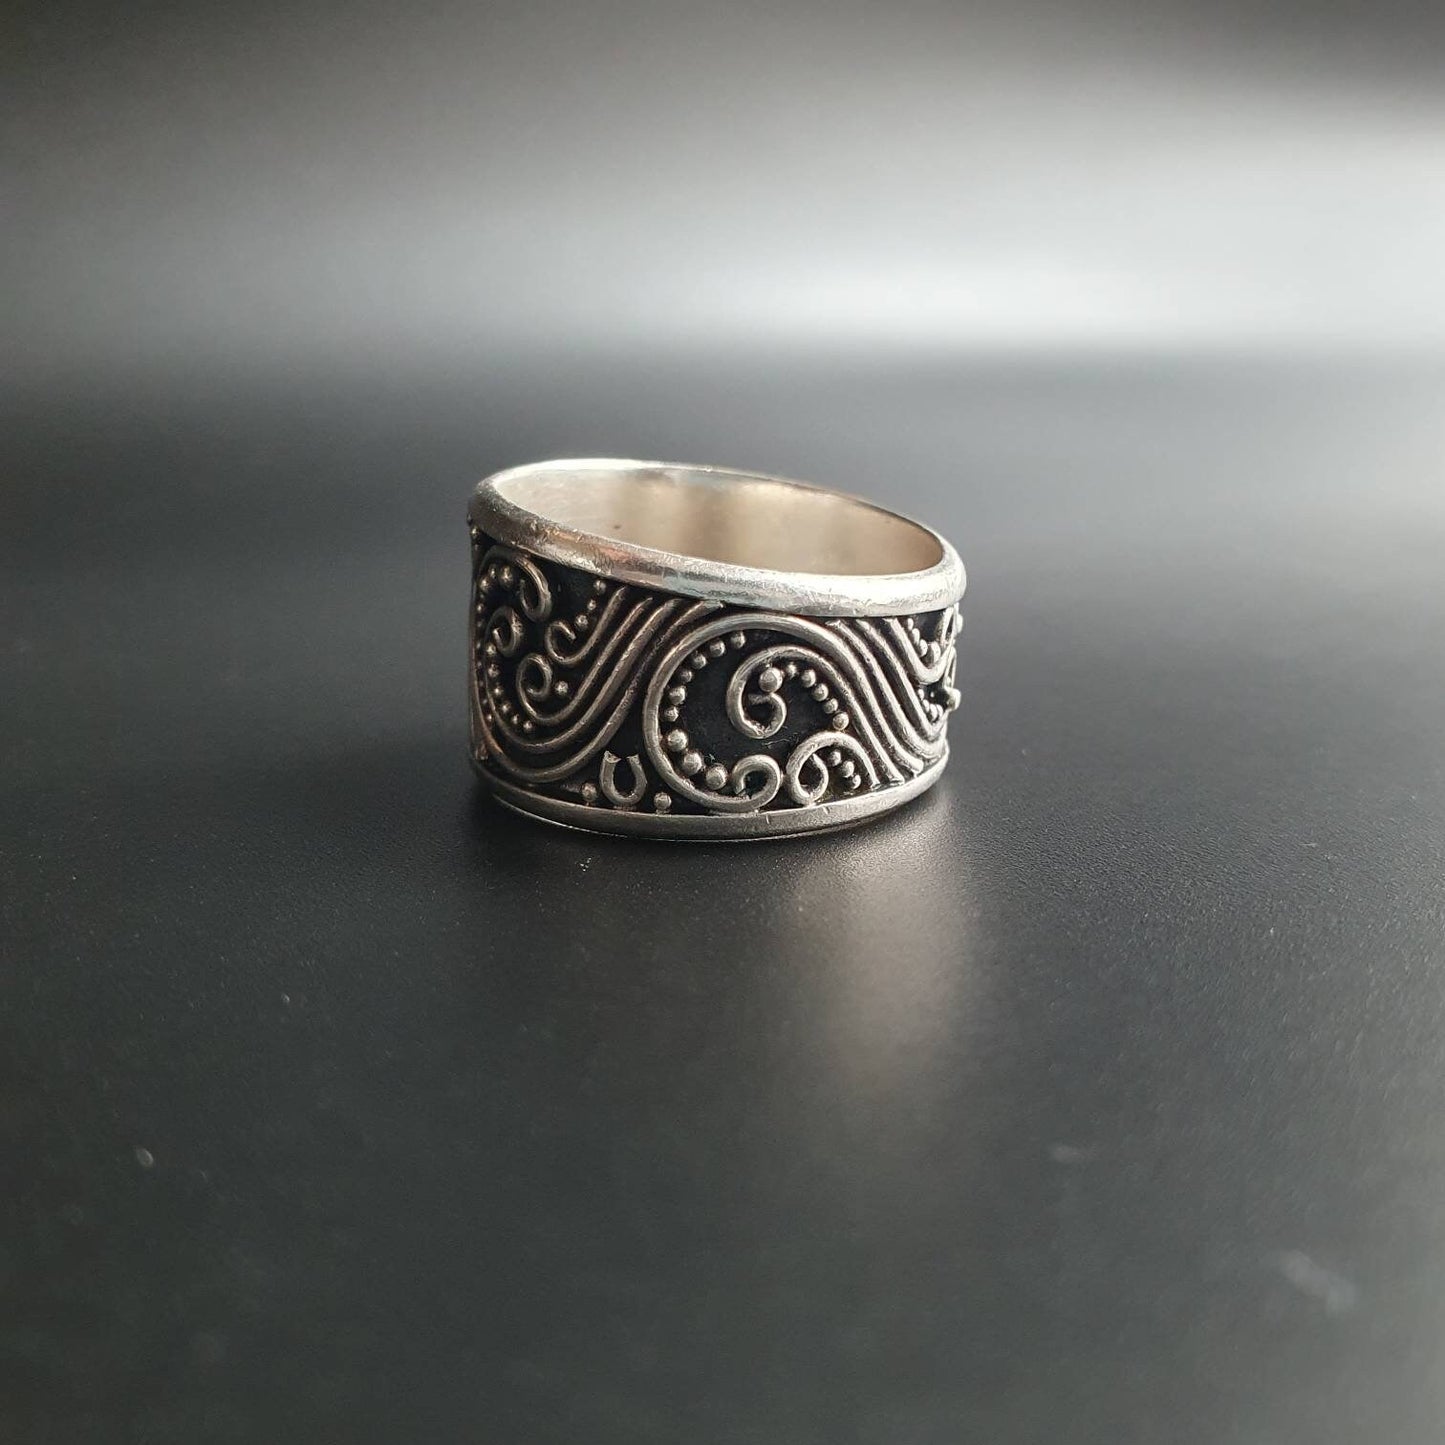 Band ring, suarti ring,suarti jewellery, filigree ring, sterling silver ring, statement ring, Unisex ring, mens rings, band ring, thumb ring